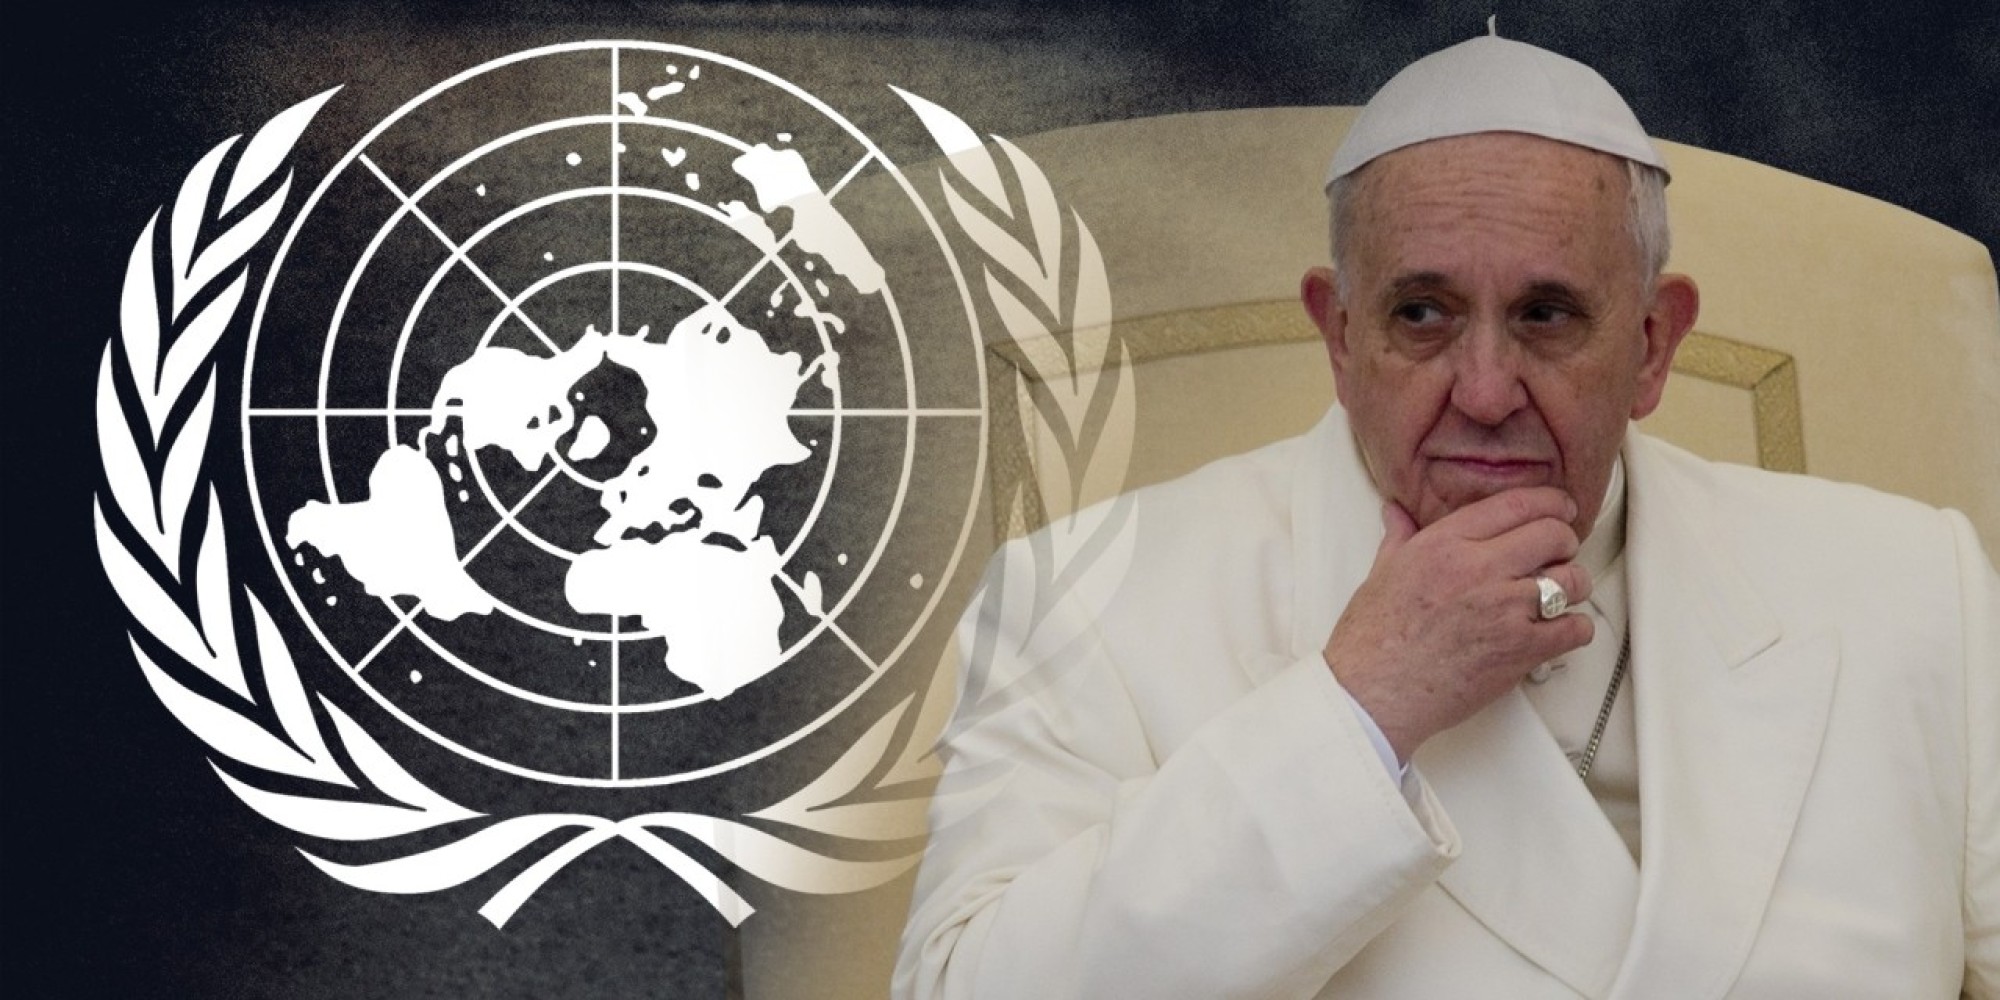 What will the Pope tell the world when he addresses the United Nations next month?